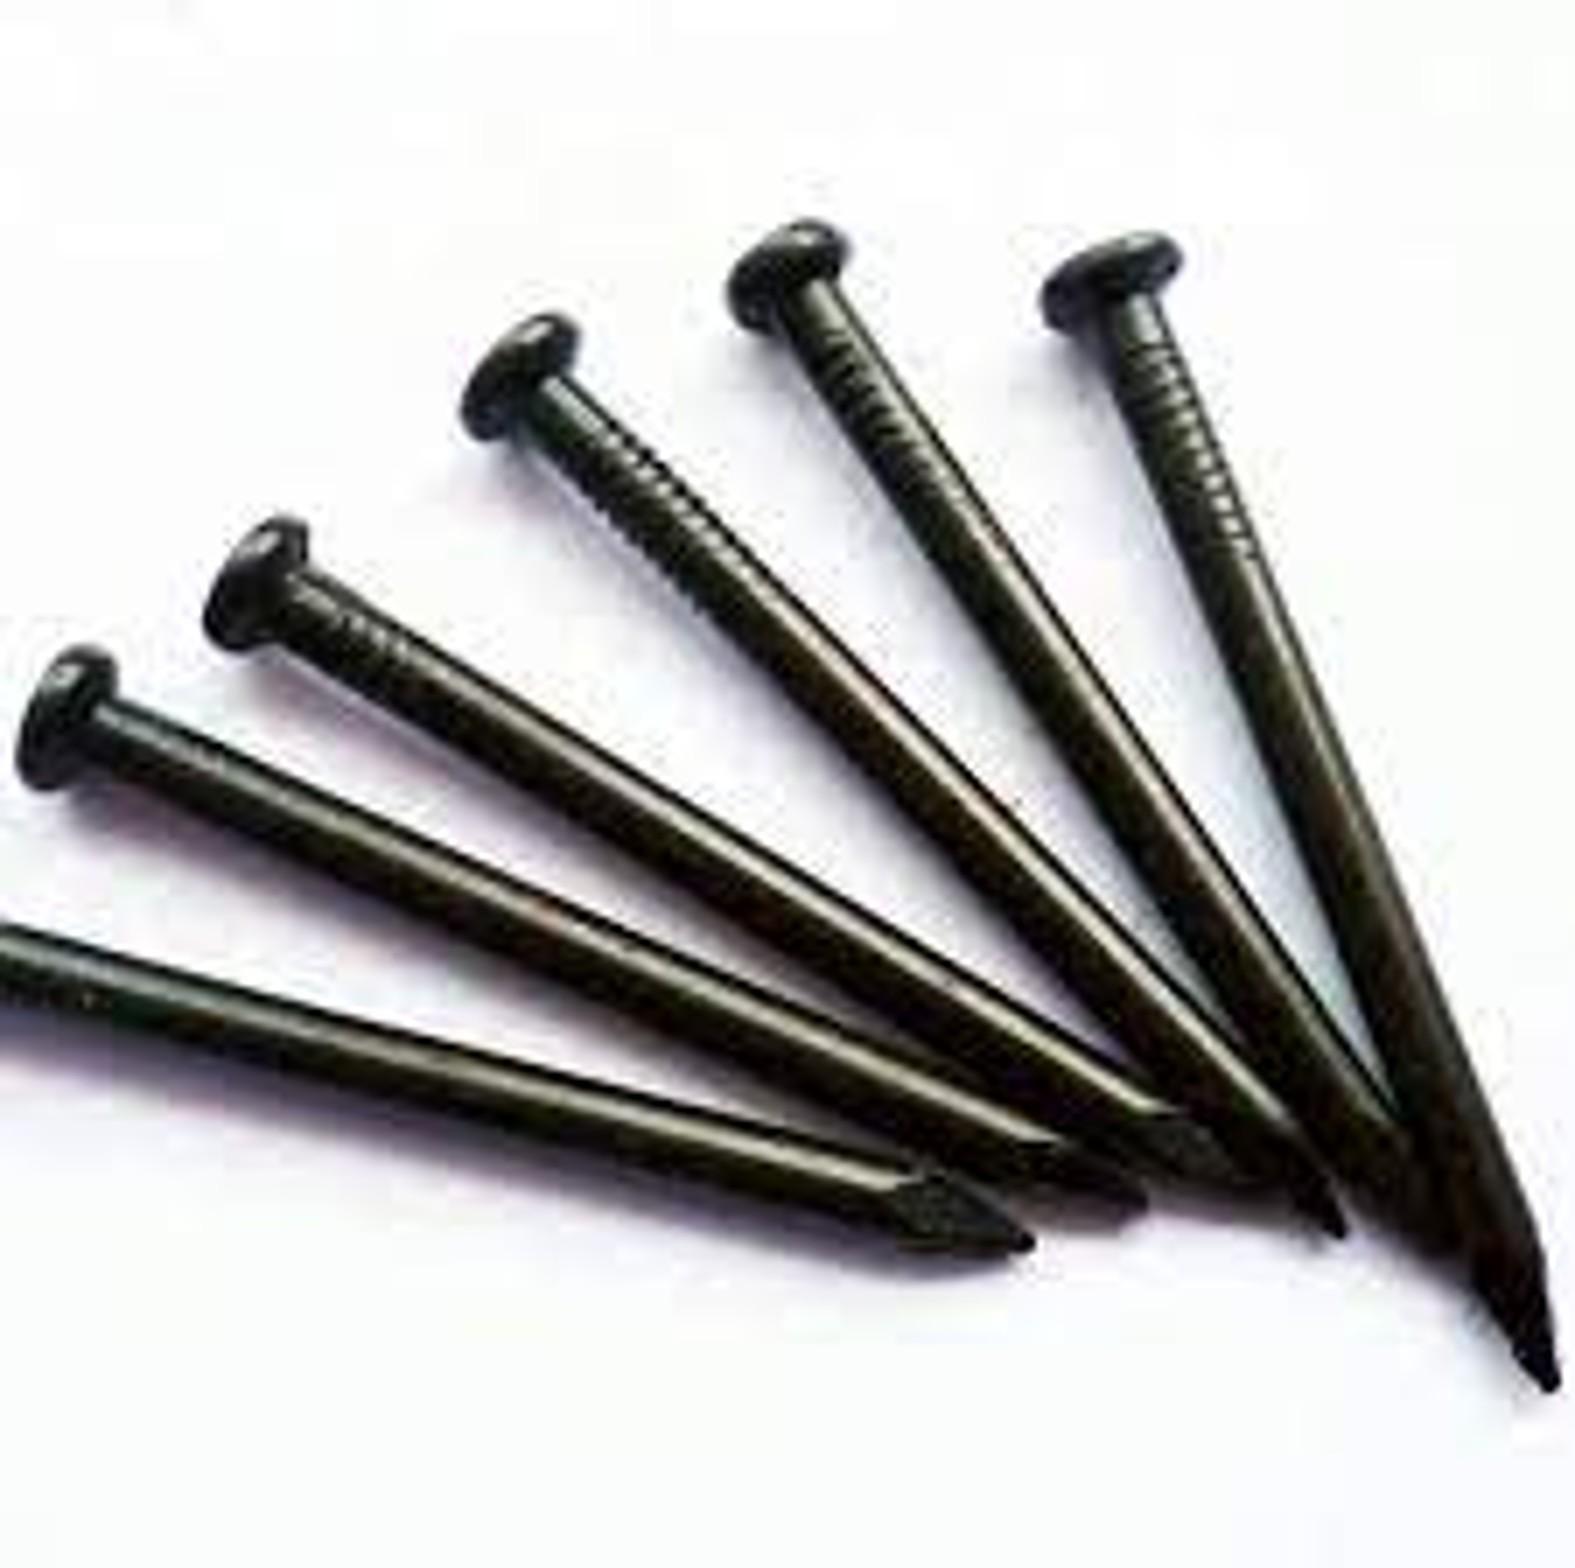 Hand-Drive Finishing Nails Carbon Steel 35mm 1.4-inches 100pcs - Amazon.com